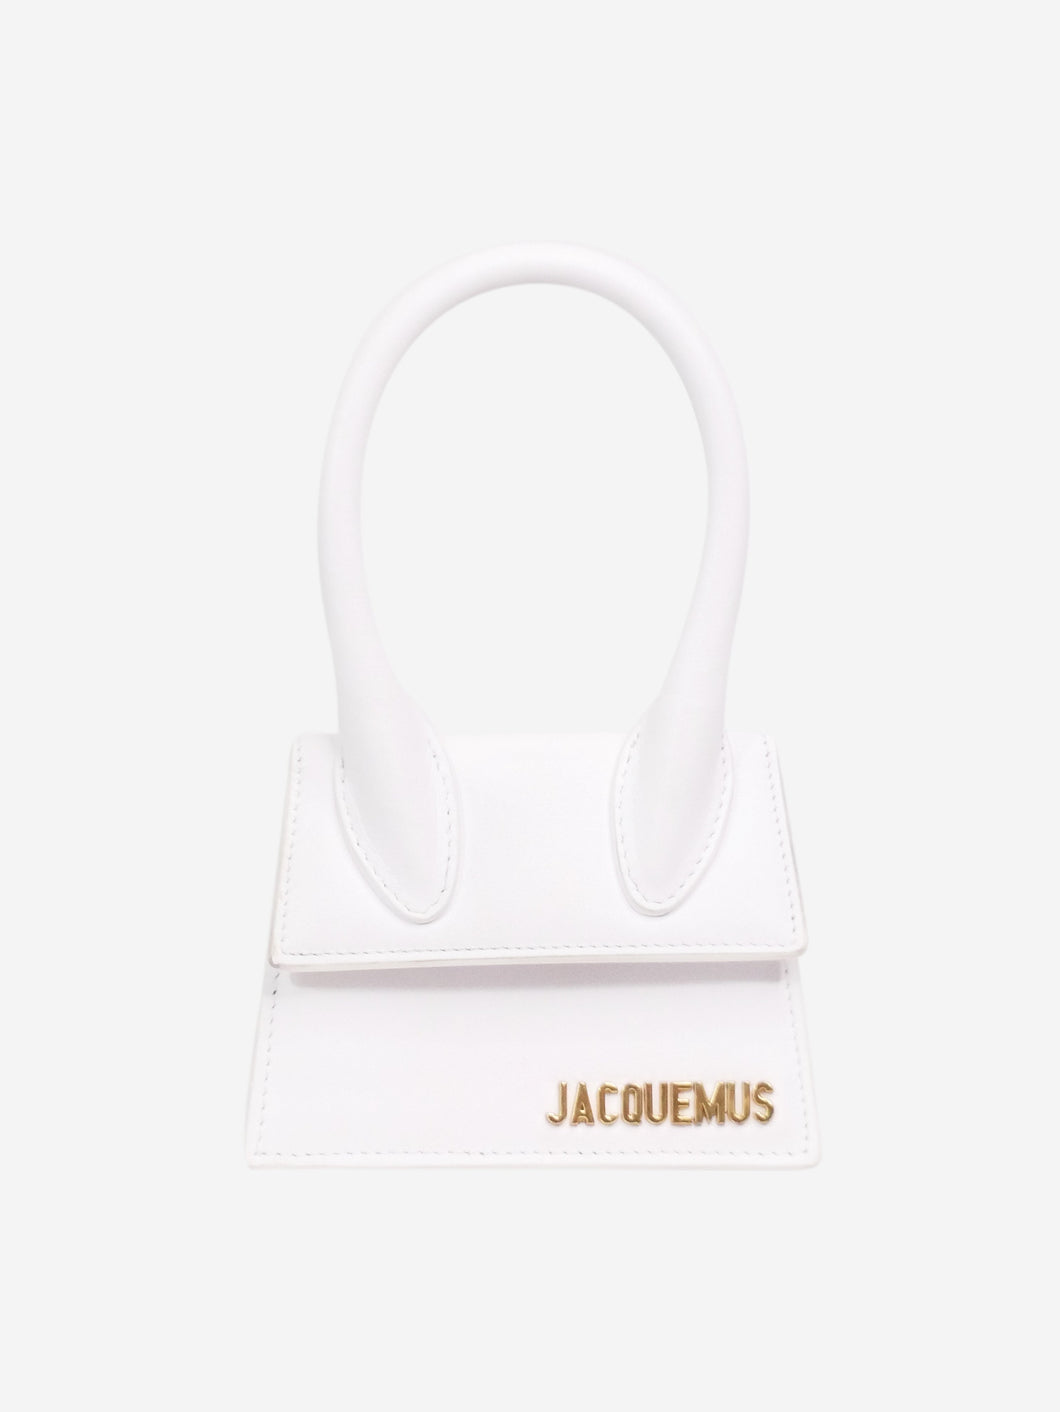 Jacquemus White Chiquito leather cross-body bag - size Shoulder bags Jacquemus 